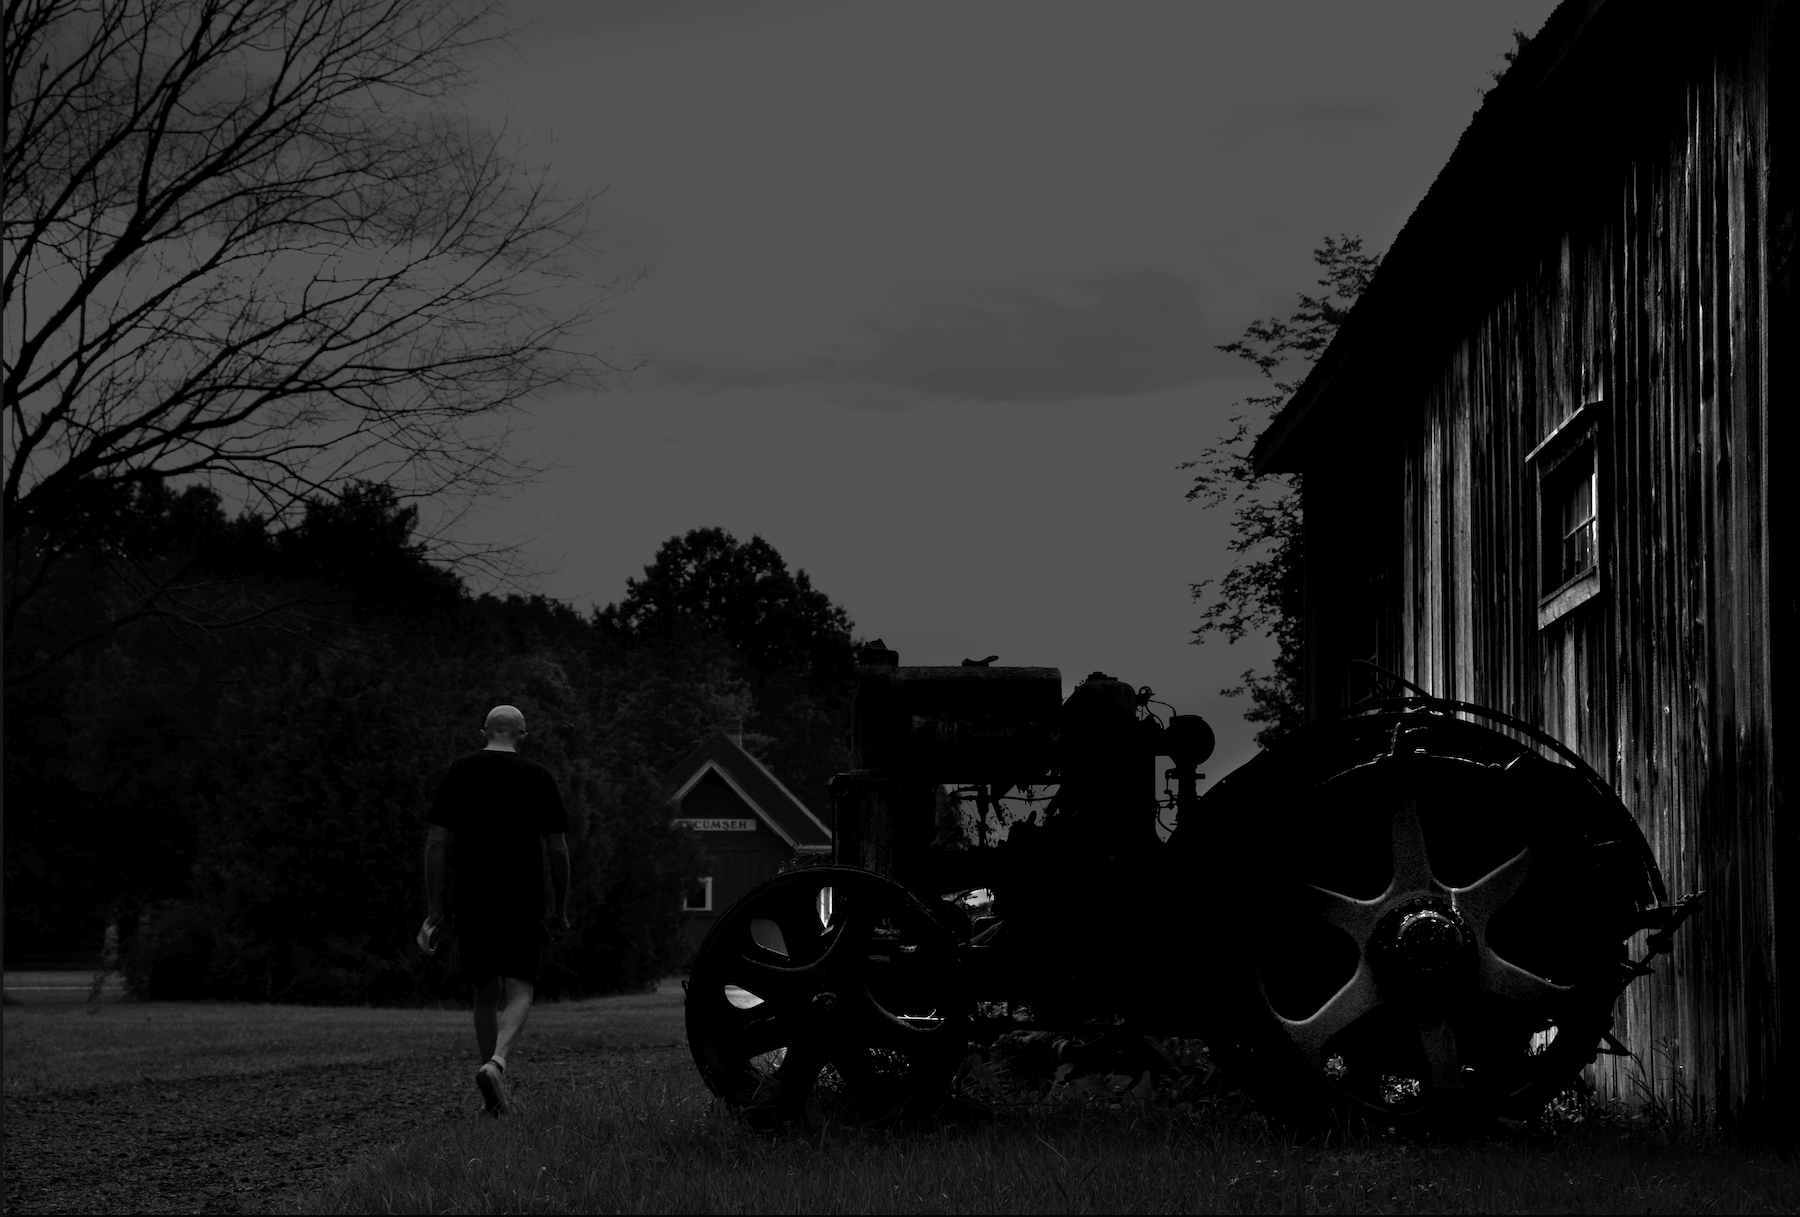 a silhouette of a man waking by an old farm tractor